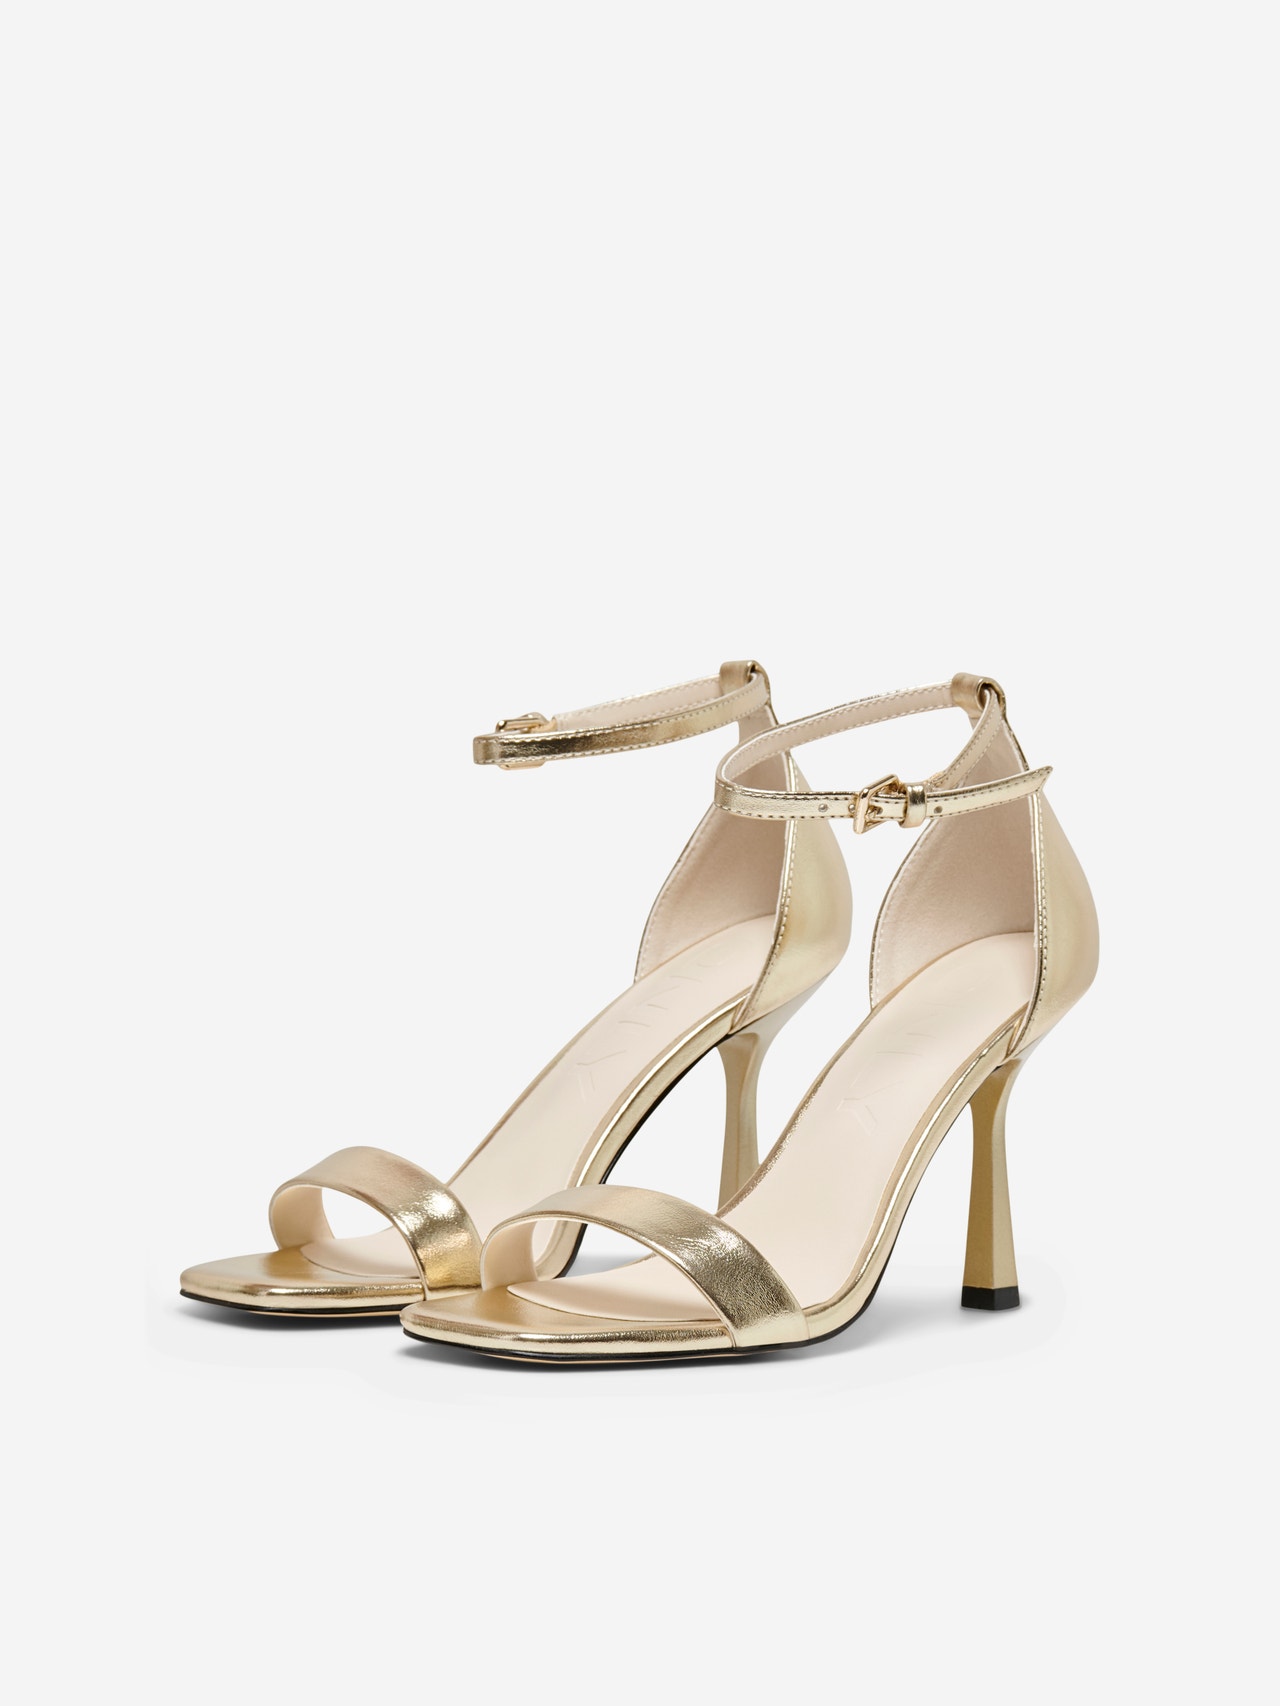 ONLY Heels with open toe -Gold Colour - 15288449